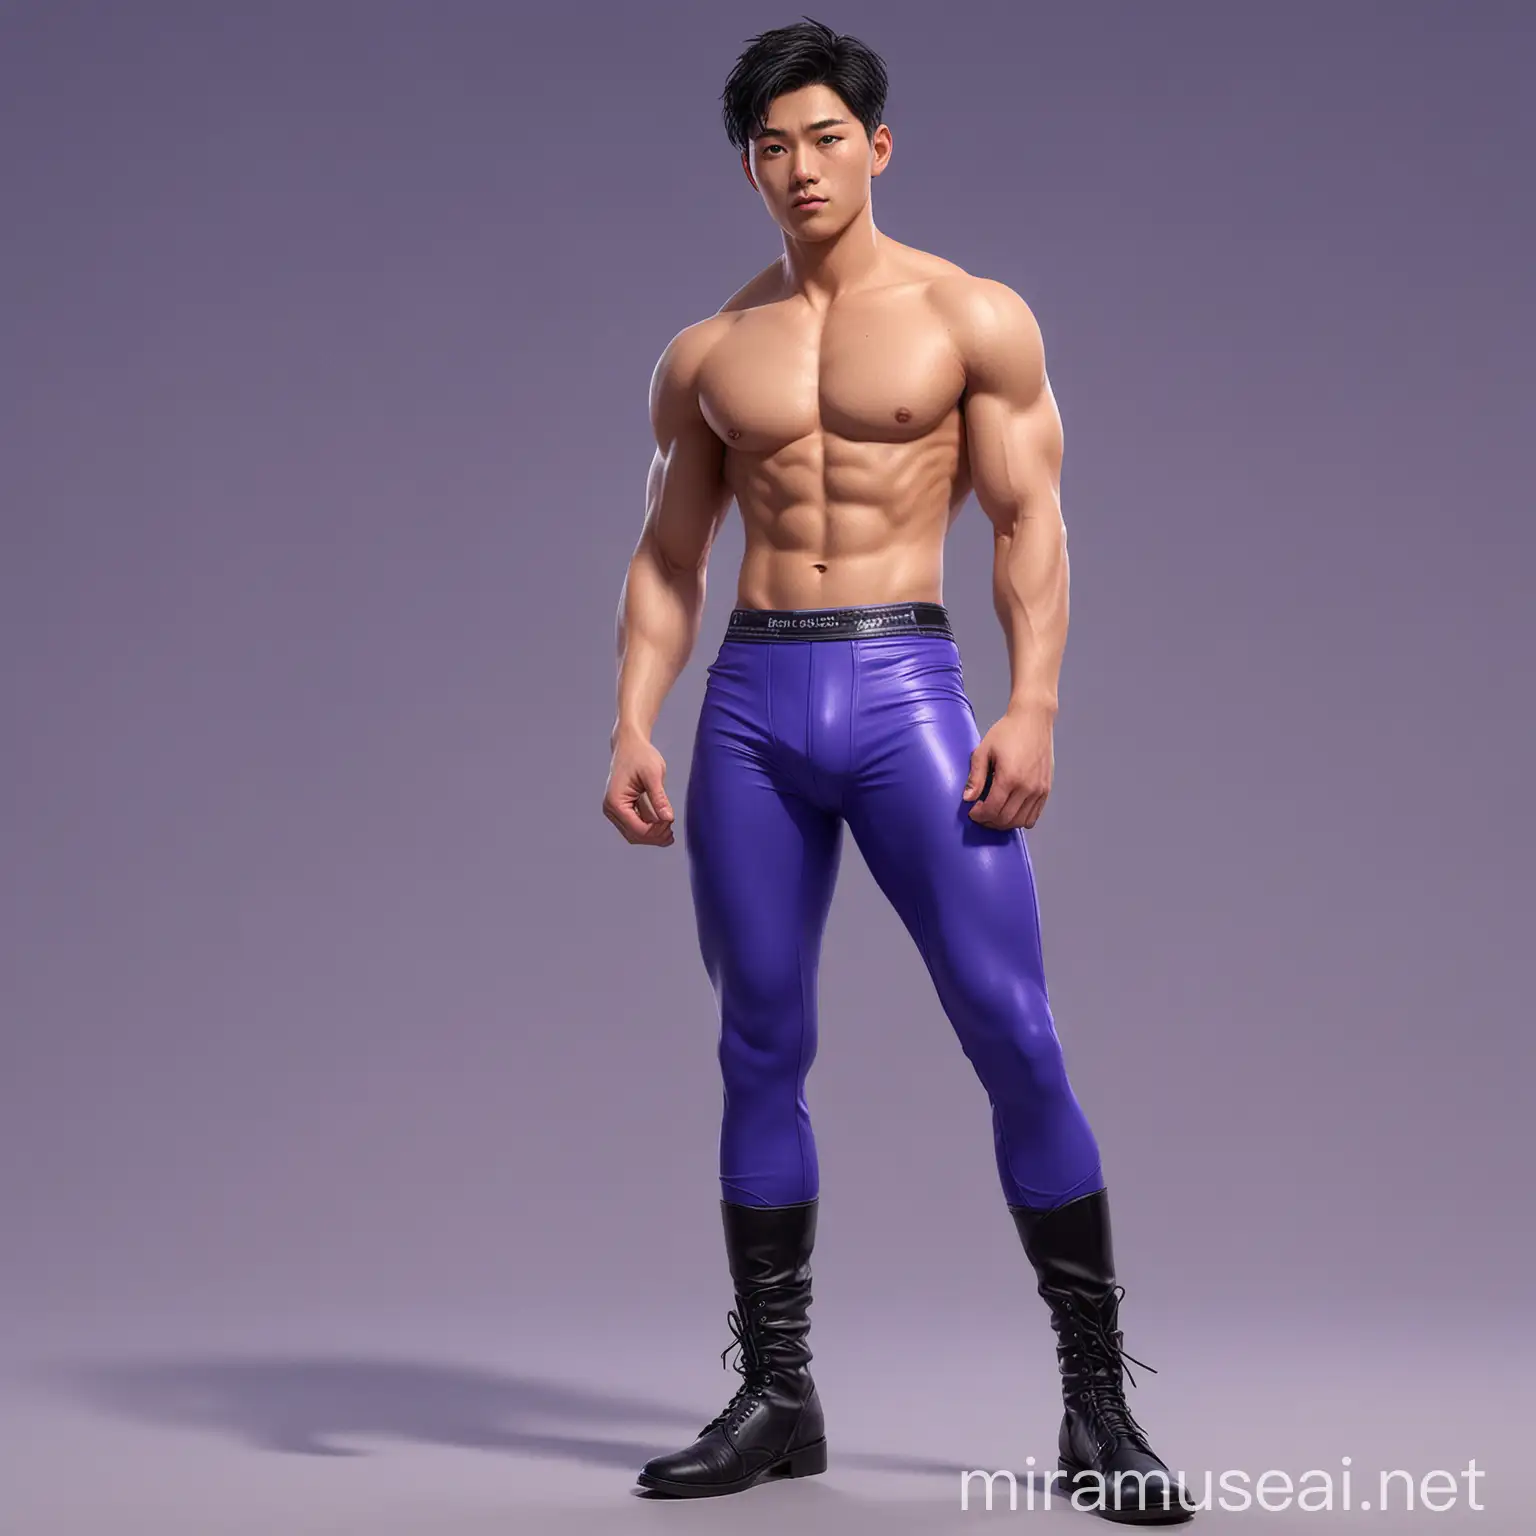 Charming fit shirtless 22 year old male South Korean fighter, with short  black hair , pointed eyebrows, tan skin; wearing long cobalt blue (leaning to purple) spandex leggings; black boots and wristbands, in pixar art style.